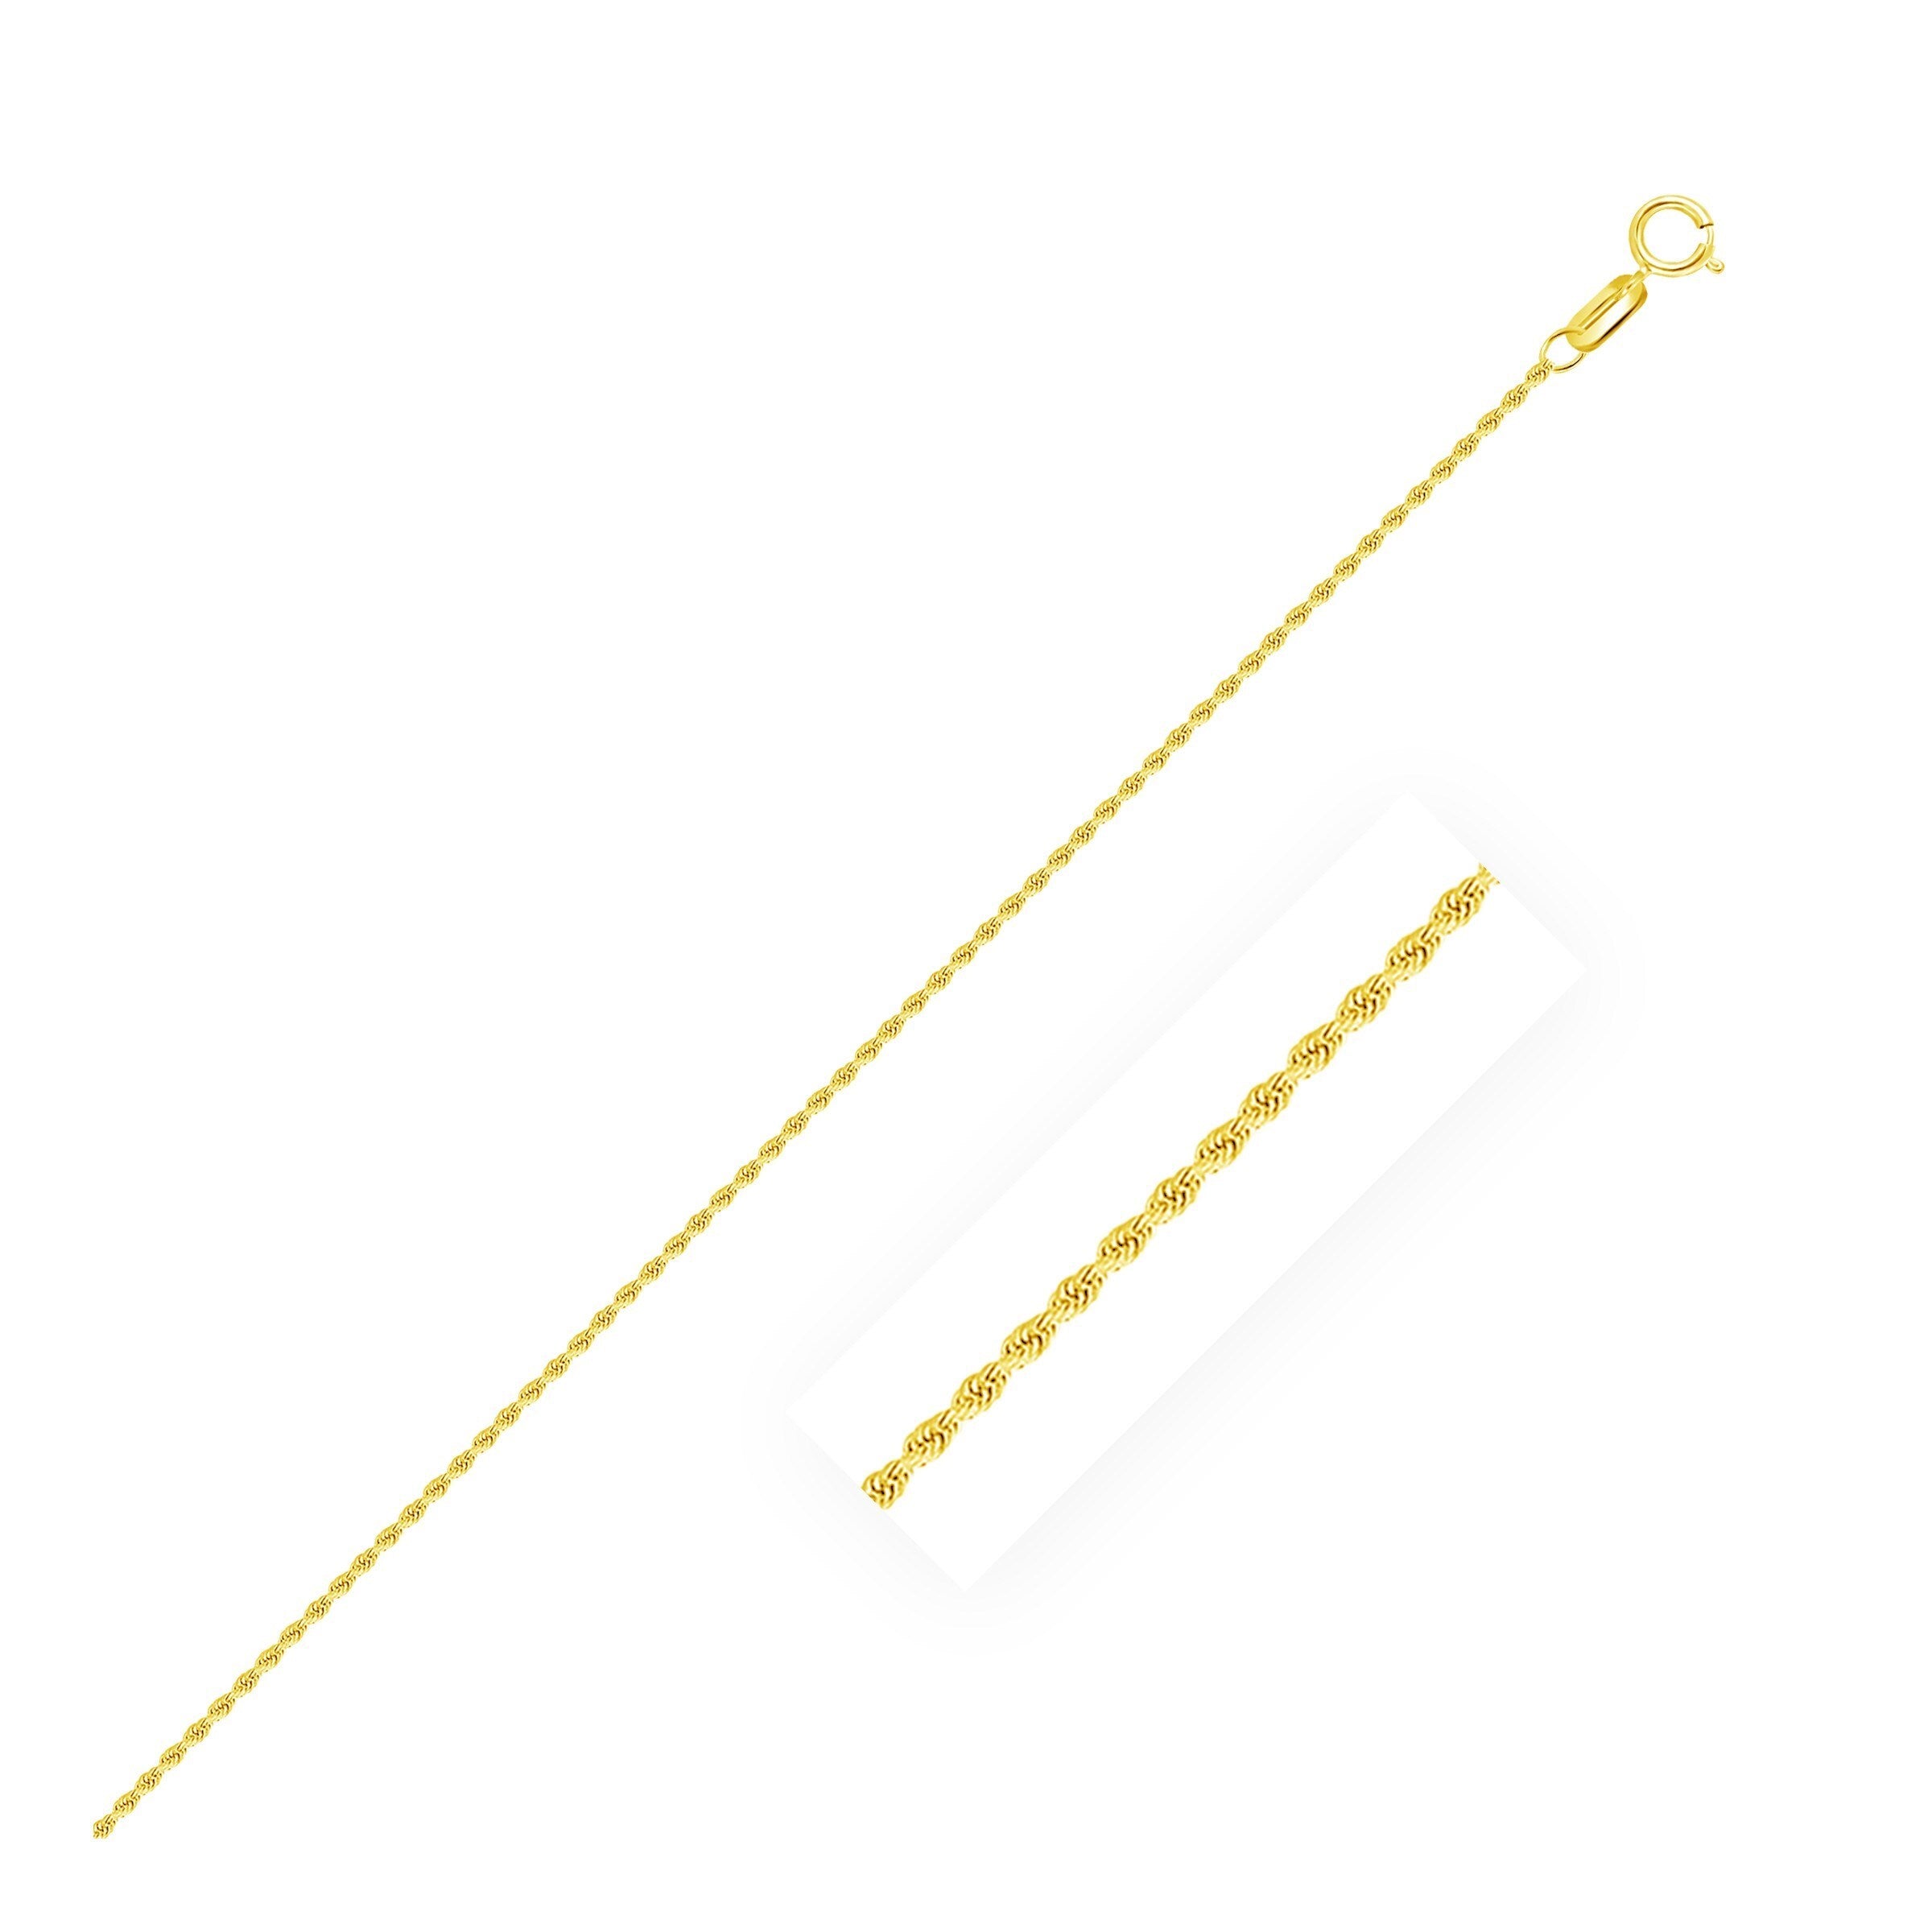 10k Yellow Gold Diamond Cut Rope Anklet 1.25mm, size 10''